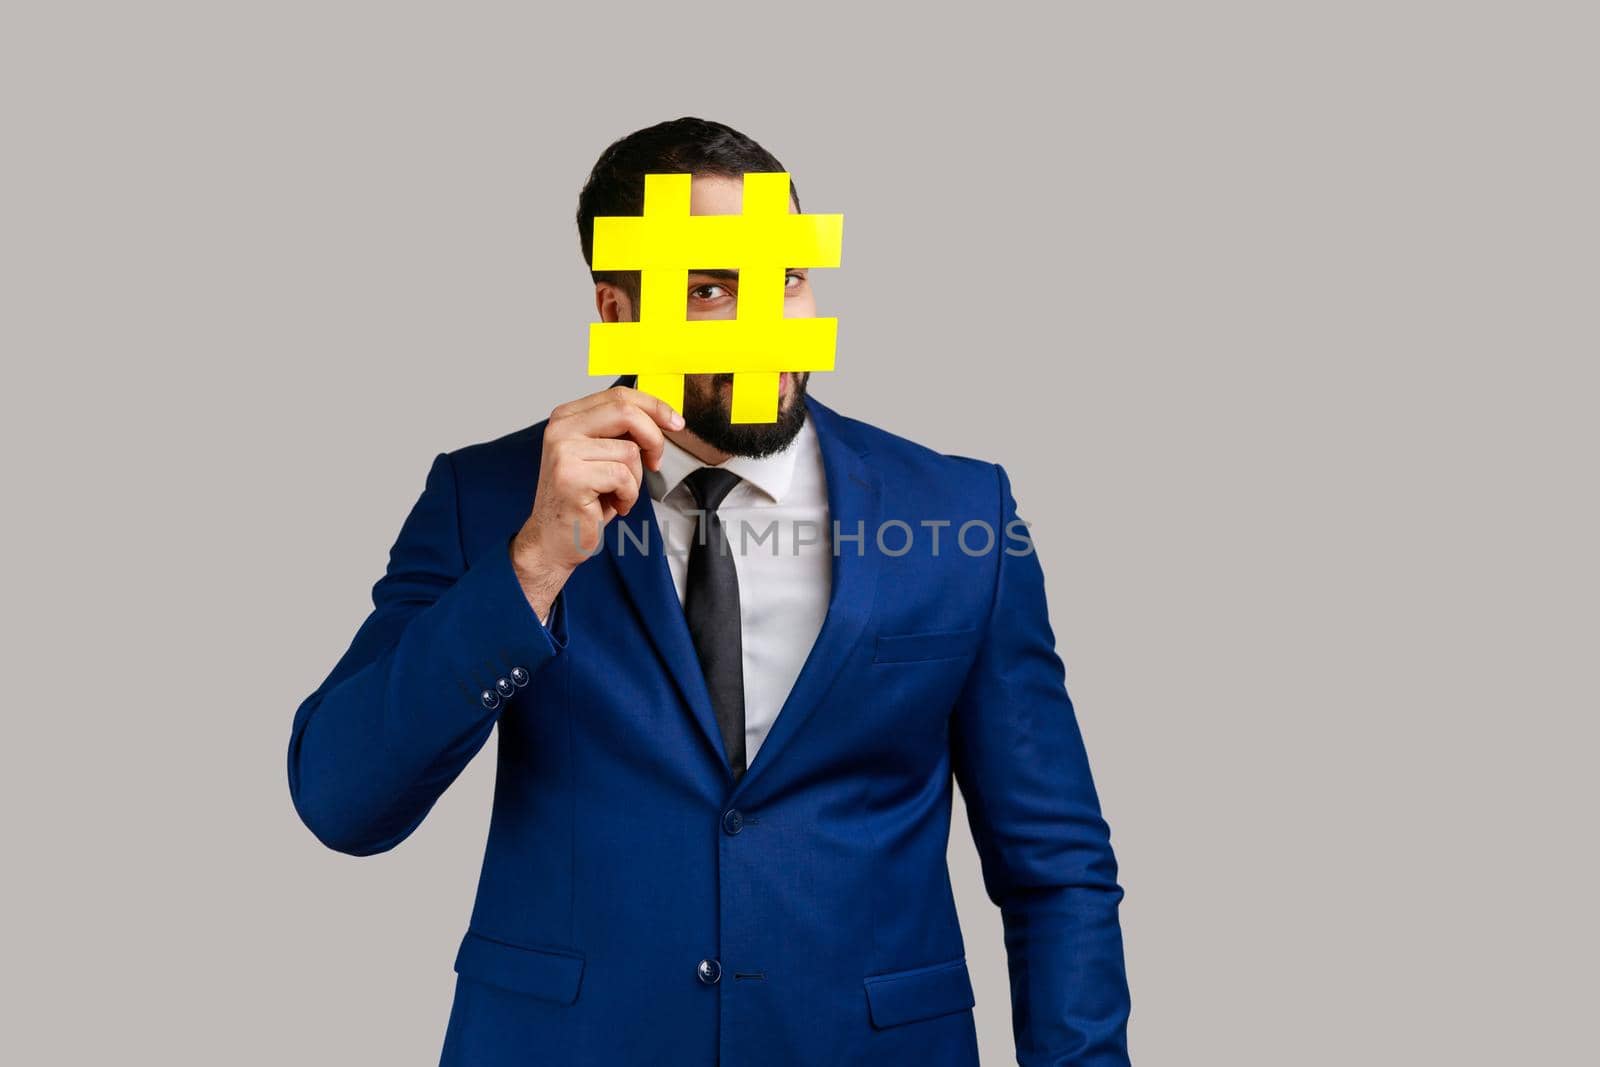 Man covering face with social media hashtag symbol, recommending to follow trendy content, popular business blog, wearing official style suit. Indoor studio shot isolated on gray background.